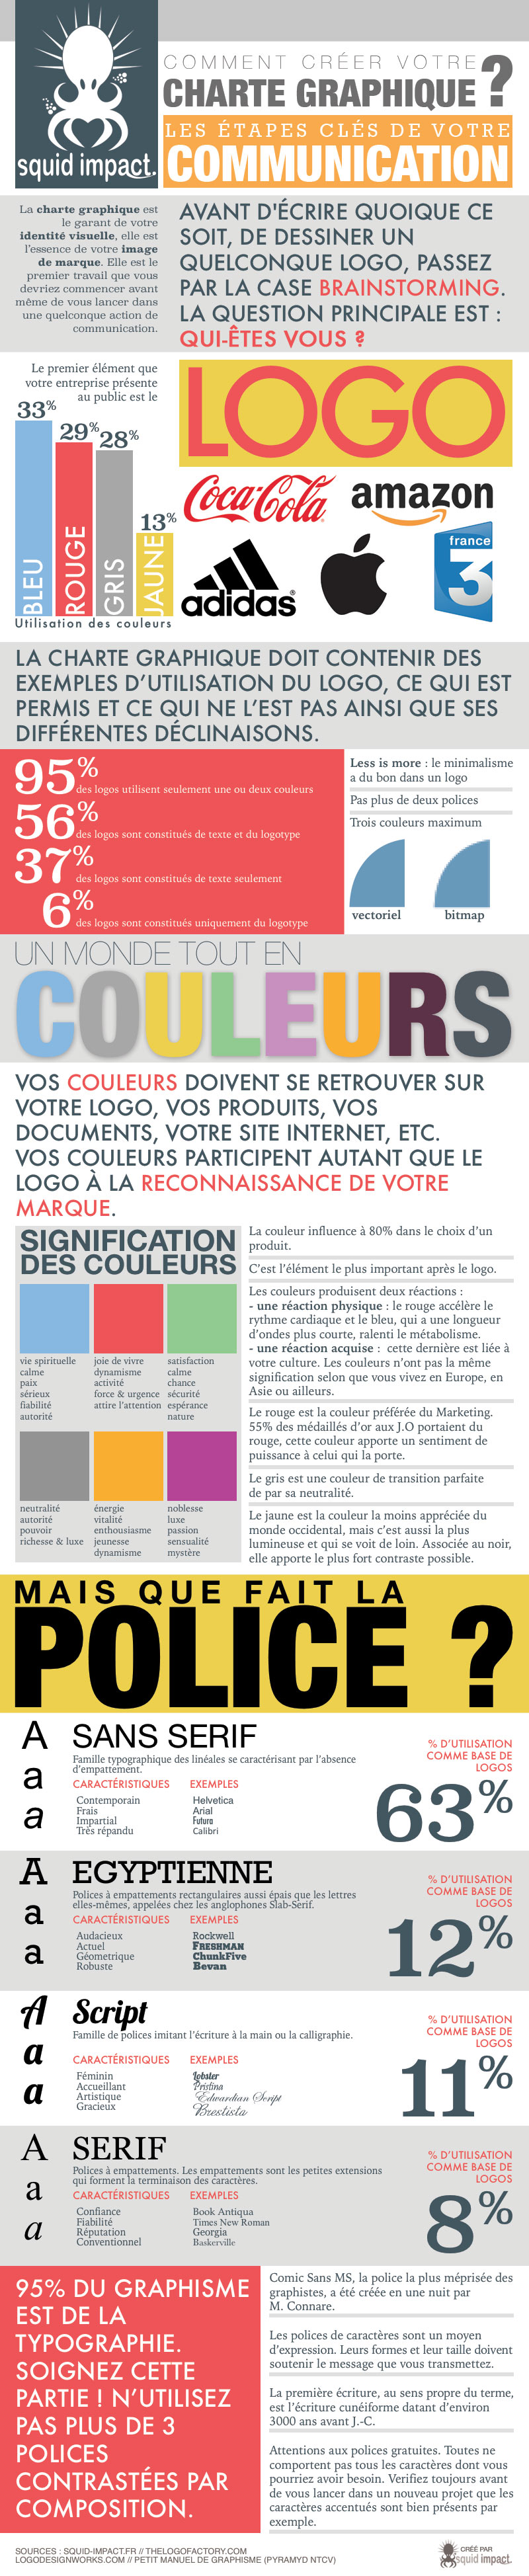 infographie_creer_charte_graphique